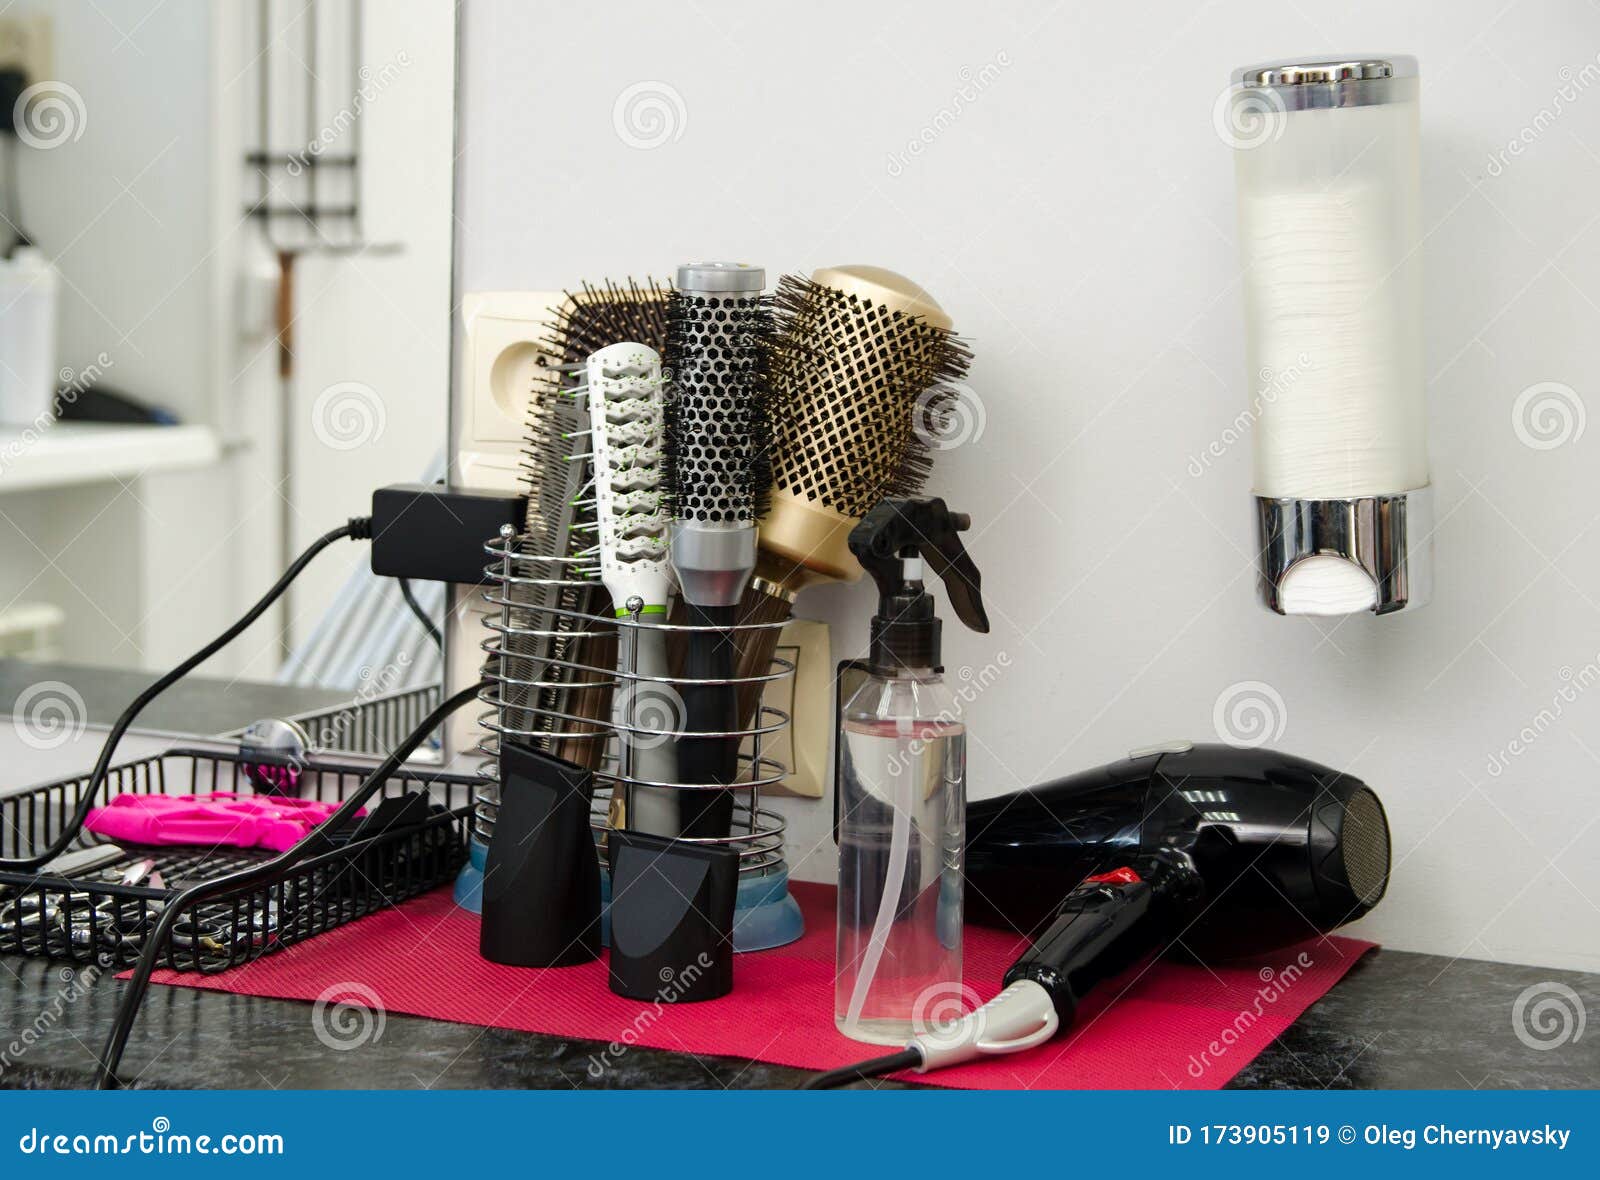 Various Professional Hair Brushes and a Black Hairdryer on a Table in a Hairdressing  Salon Stock Image - Image of object, grooming: 173905119